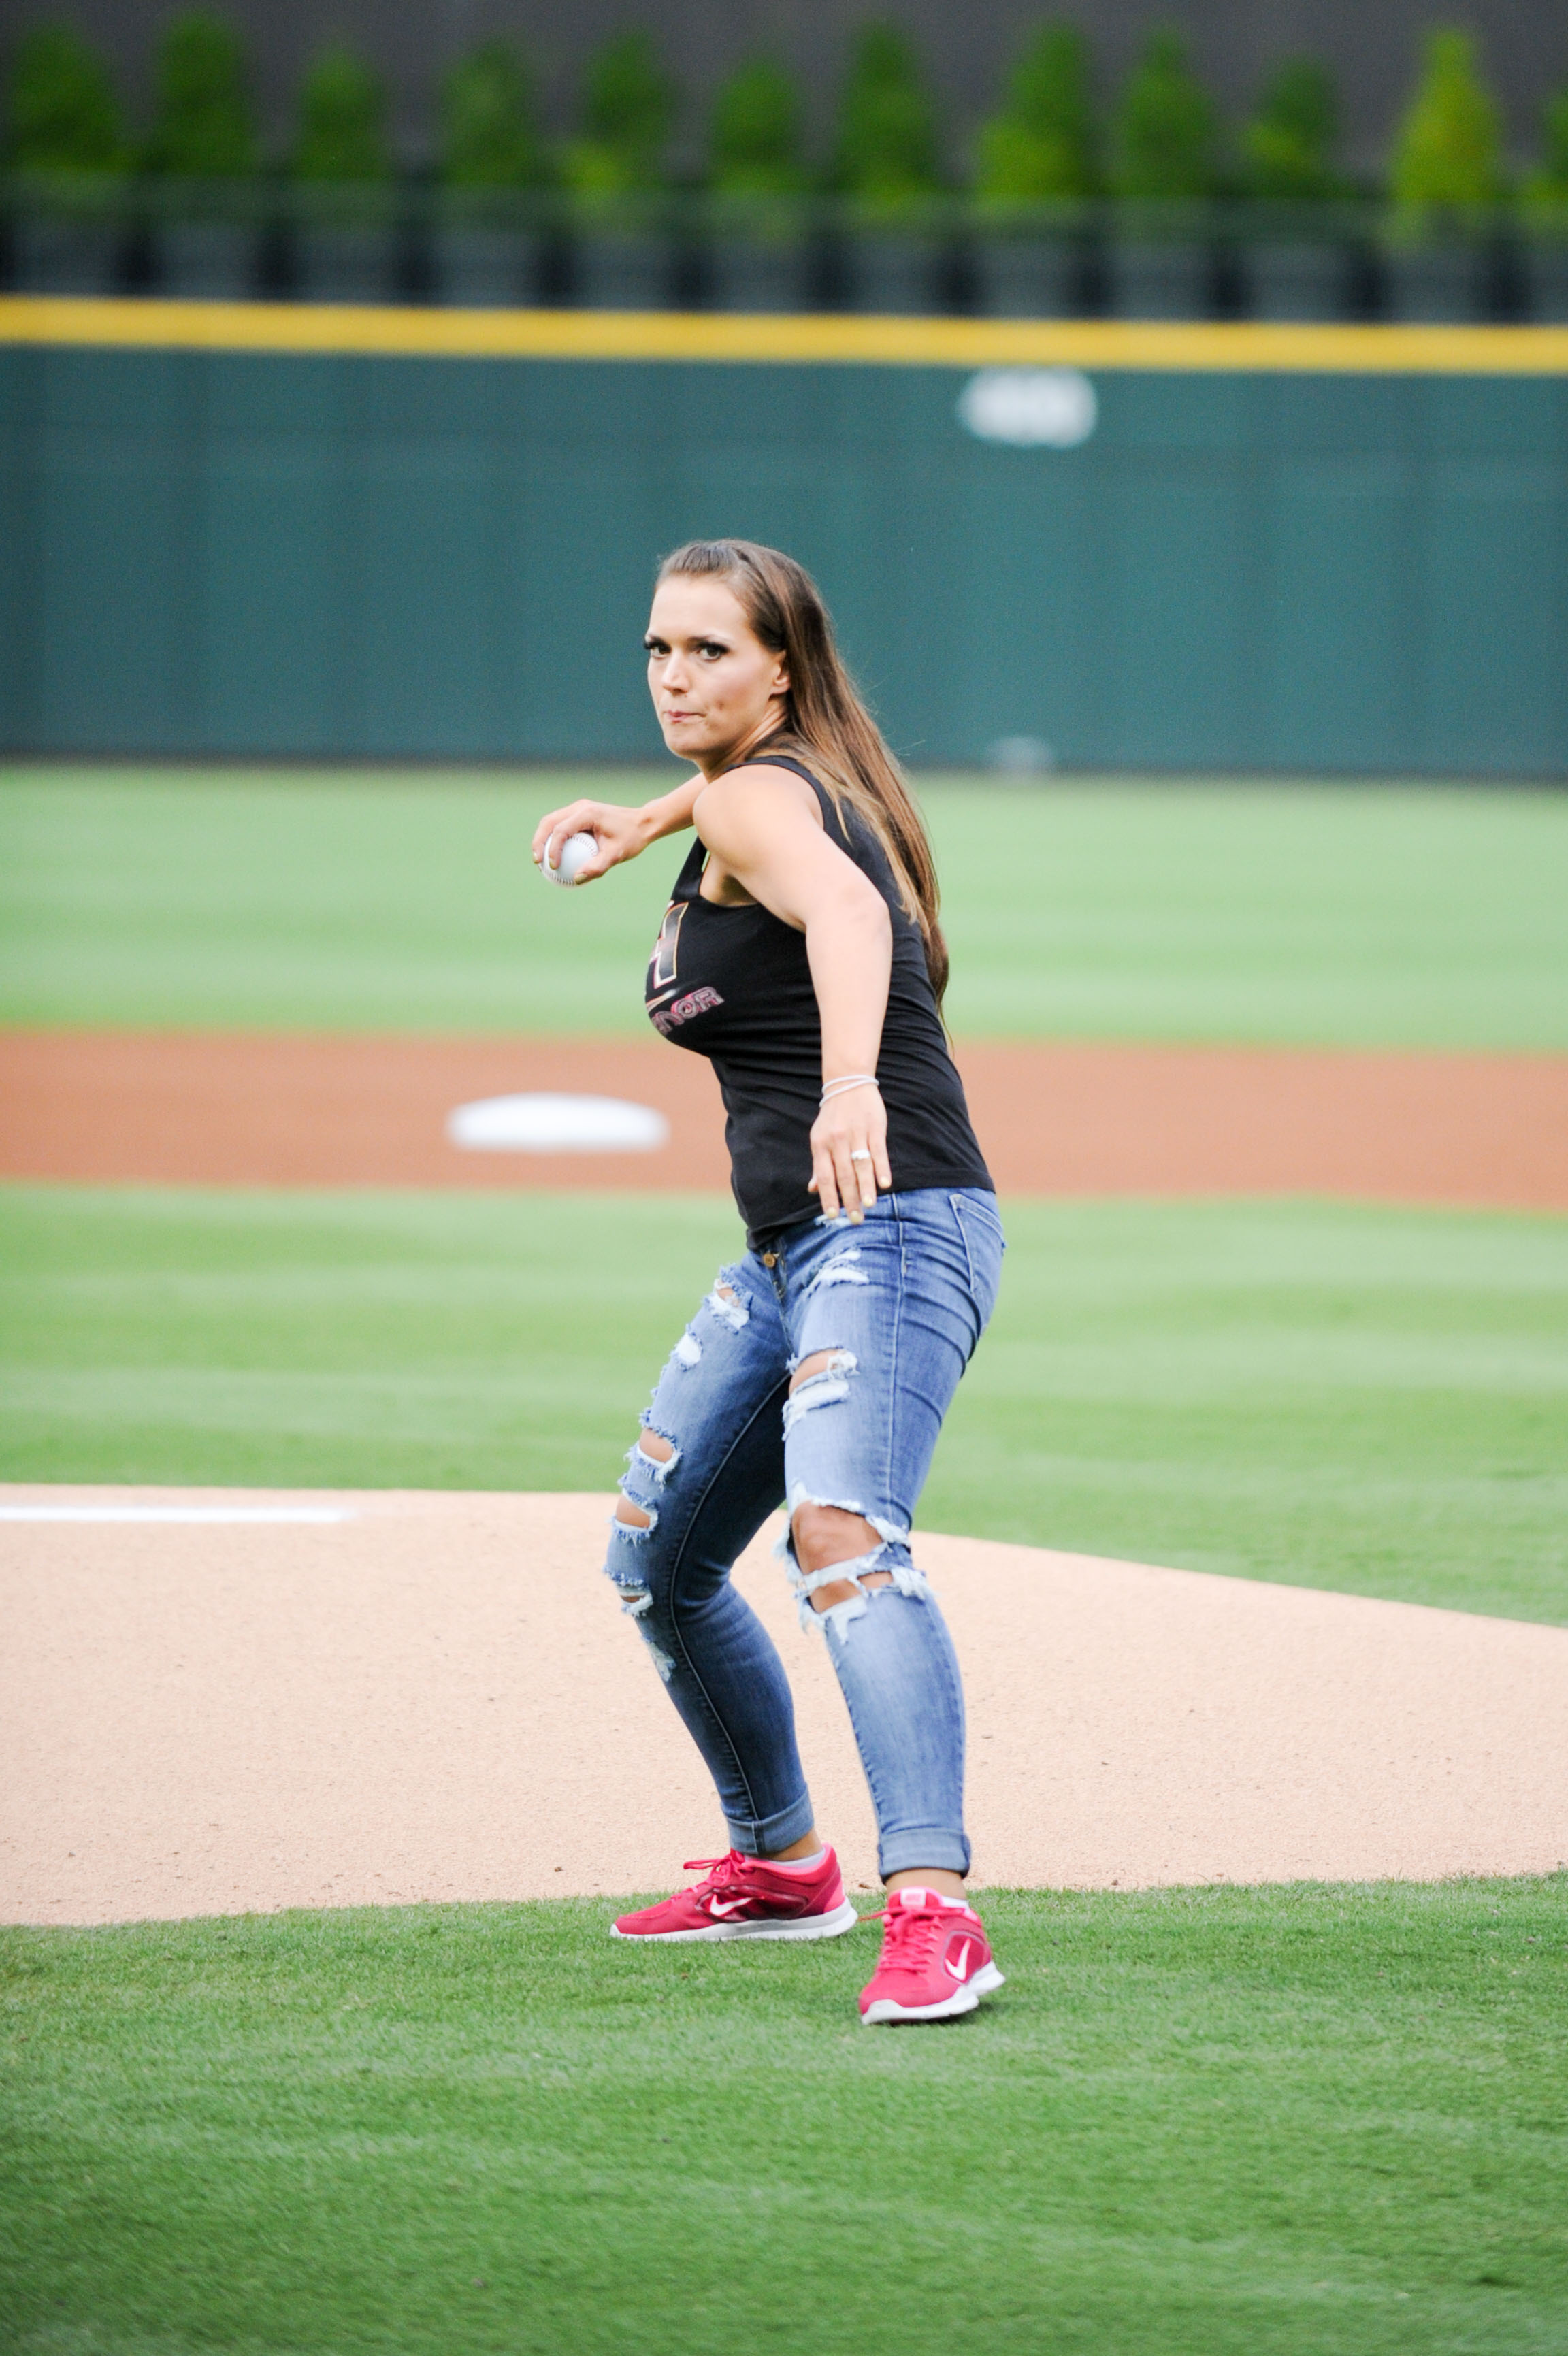 Kelly Klein's Opening Pitch